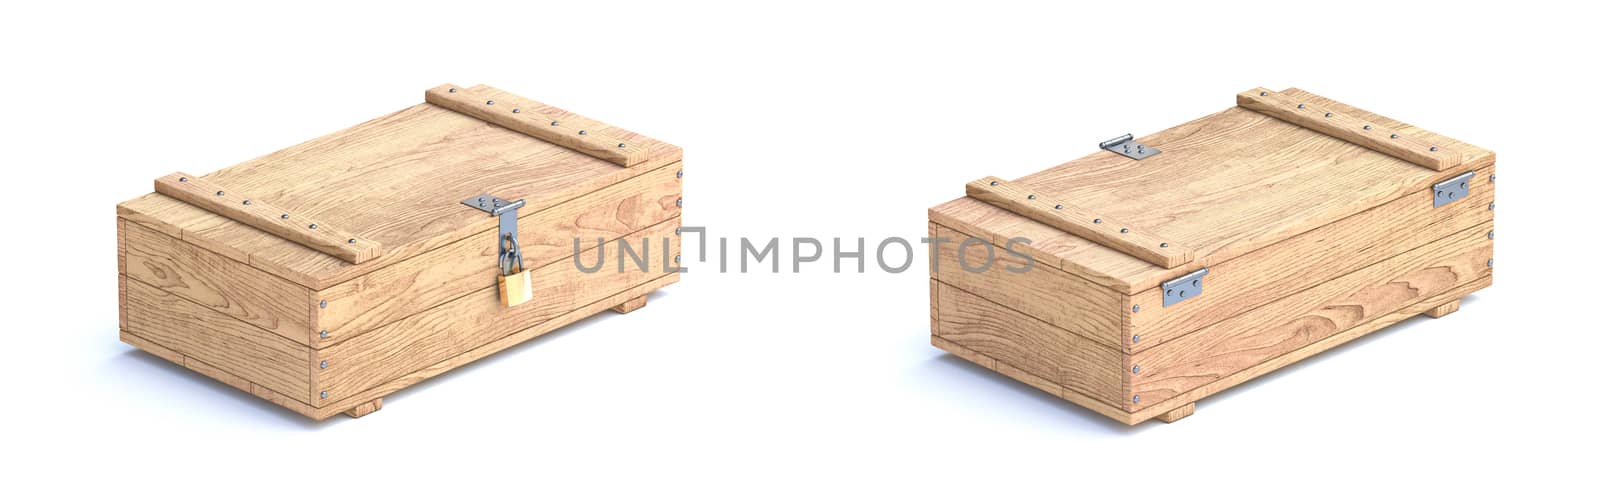 Wooden boxes 3D render illustration isolated on white background